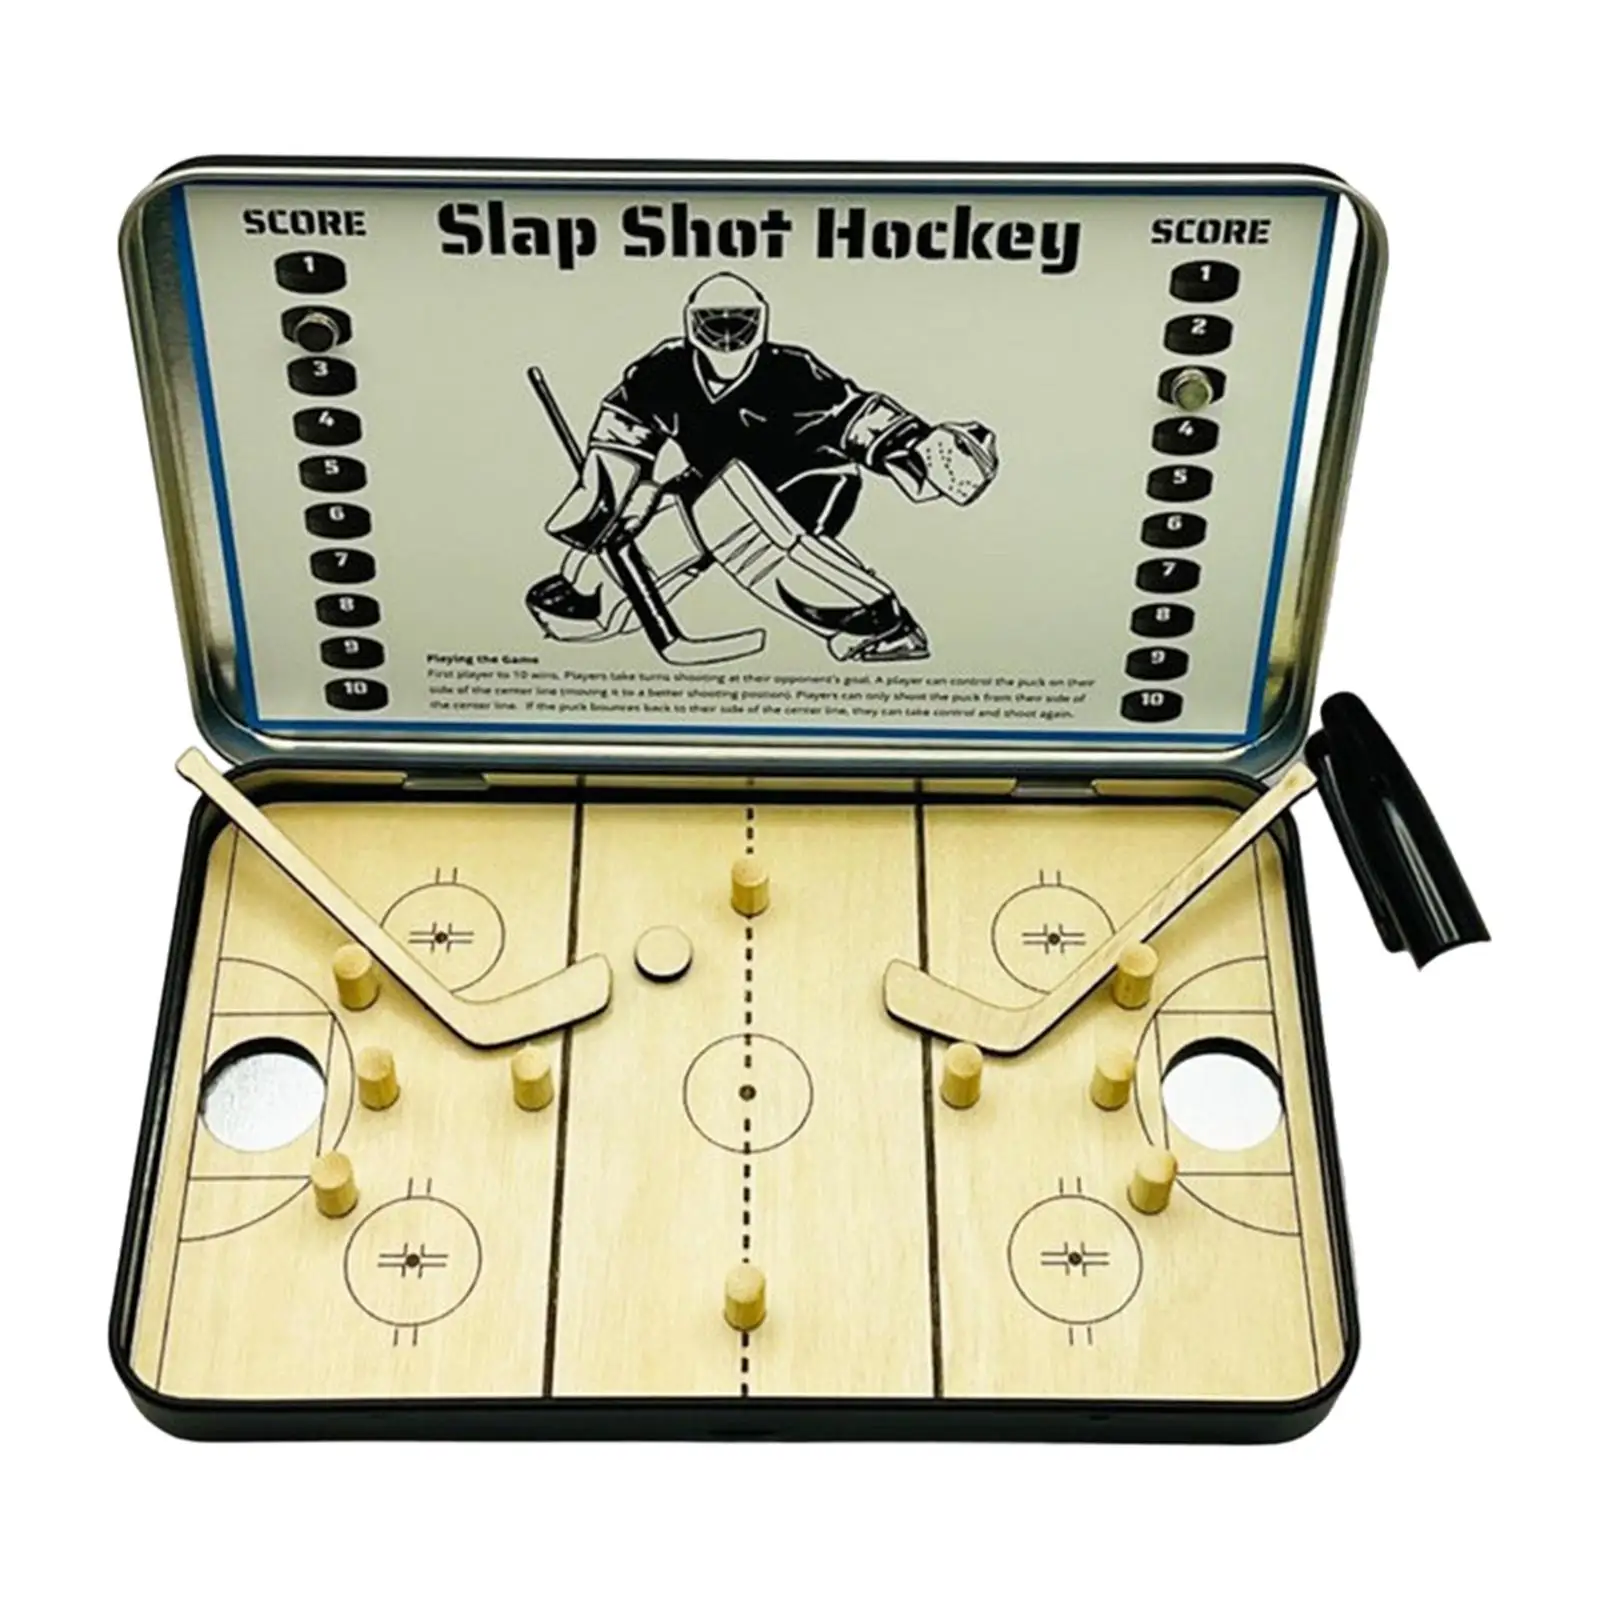 Mini Table Hockey Game 7 inch Compact Desktop Sports Game Kids Airplane Toy